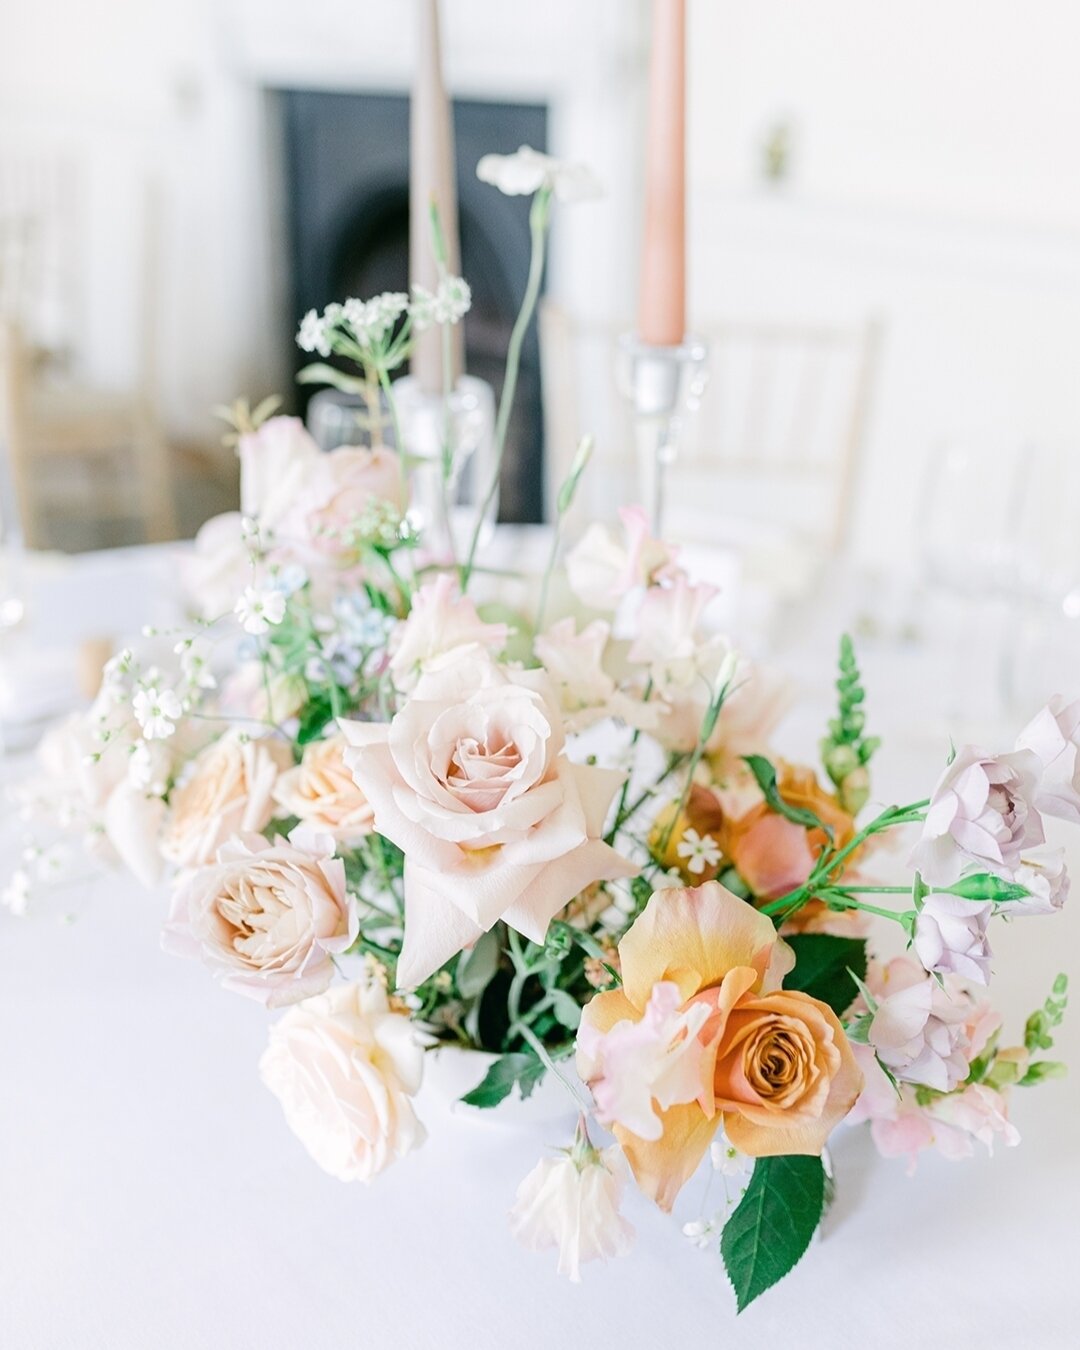 Beautiful blush &amp; apricot tones for Charlotte &amp; Rob's summer wedding at @pyneshouse. 🤍

I always enjoy photographing fresh florals at weddings and these table centrepieces by @theflowersessions_ were absolutely dreamy.